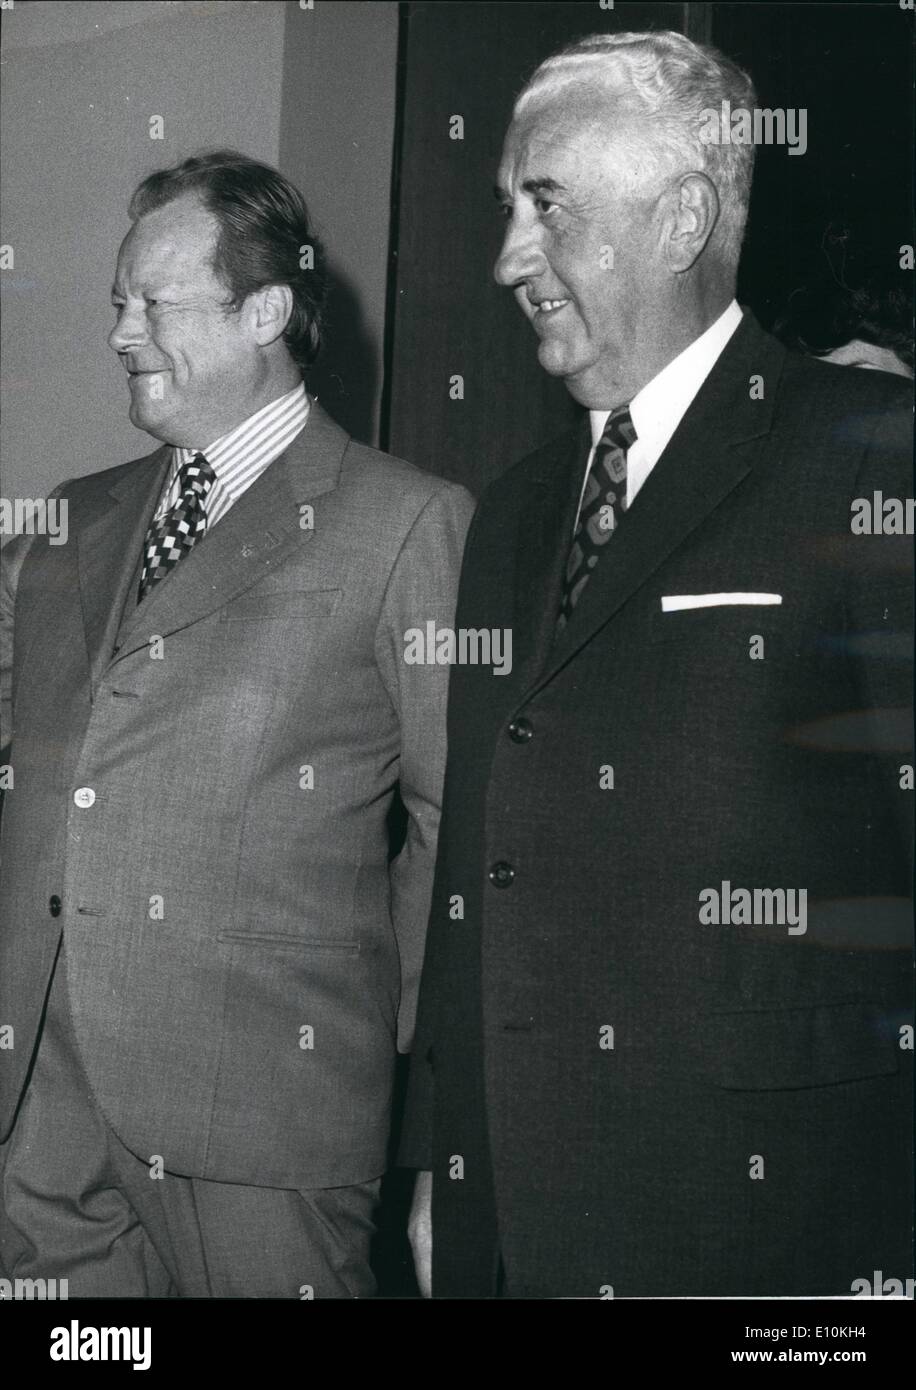 Apr. 04, 1973 - Chancellor Willy Brandt of German Federal Republic Visits Yugoslavia. Picture: Chancellor Willy Brandt, left, and Yugoslav Prime Minister Dzemal Bijedic, right, in Belgrade on April 16th. Chancellor Brandt's visit to Yugoslavia included political talks with Yugoslav Prime Minister, two-day talks with Yugoslav President Josip Broz, meeting with workers of Pula Shipyard etc. Stock Photo